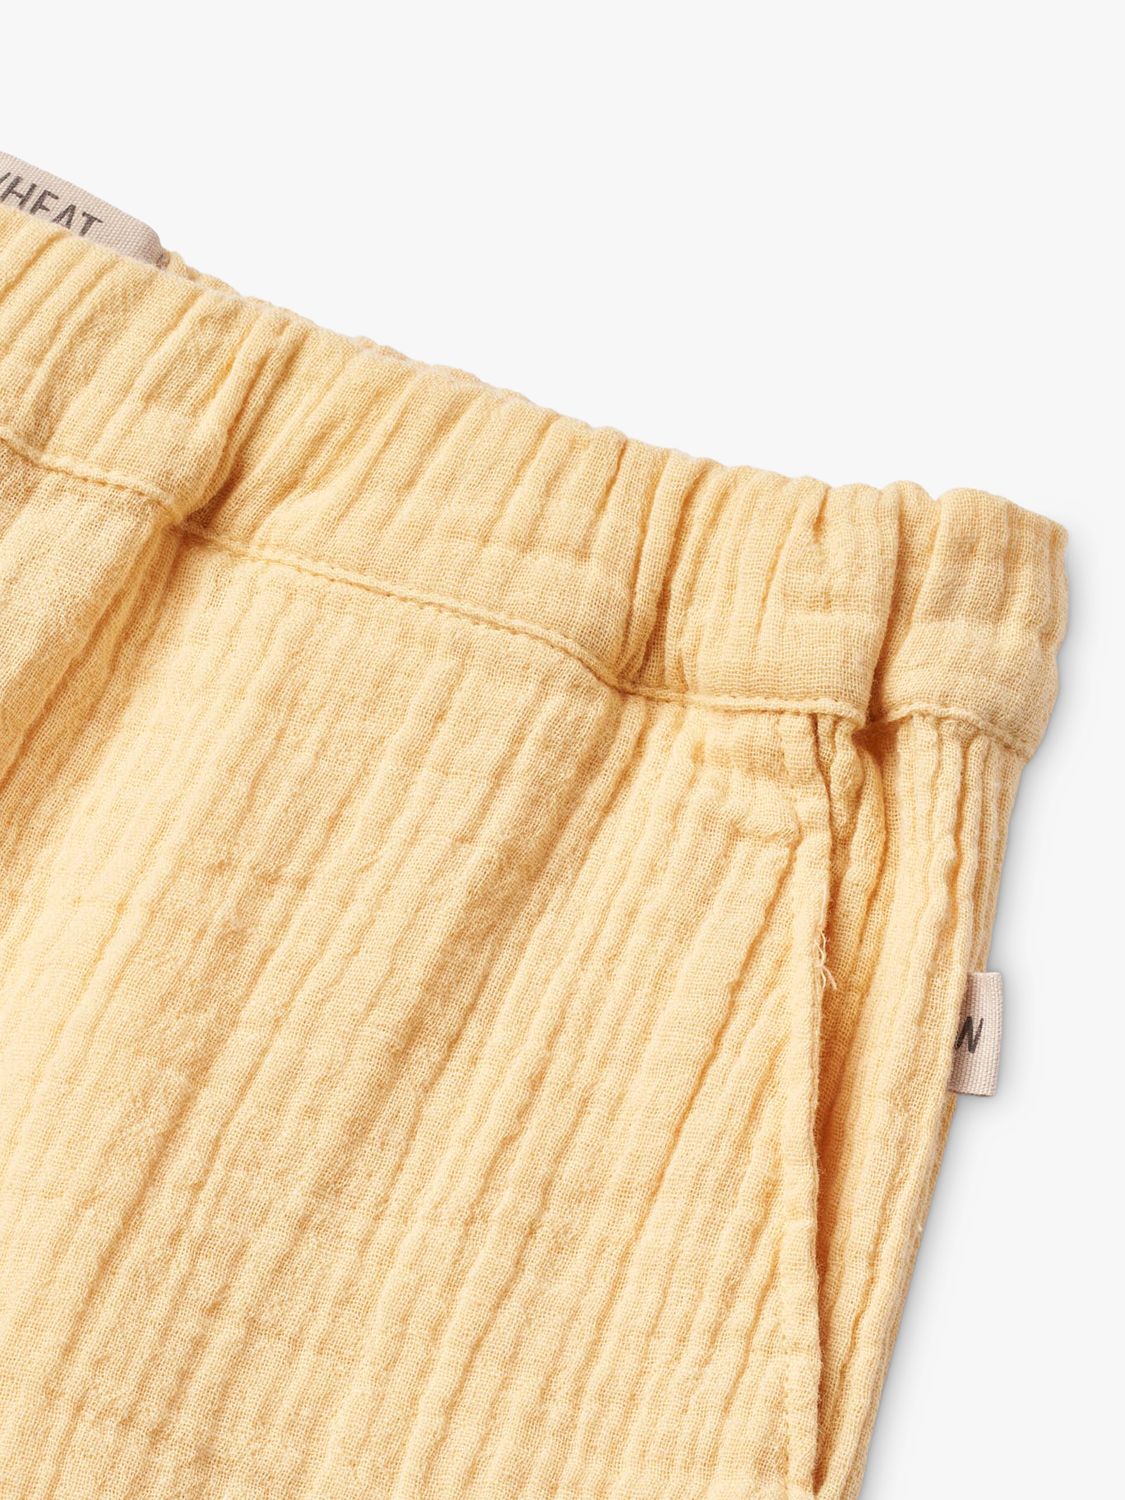 Buy WHEAT Kids' Organic Cotton Lace Eileen Shorts, Pale Apricot Online at johnlewis.com